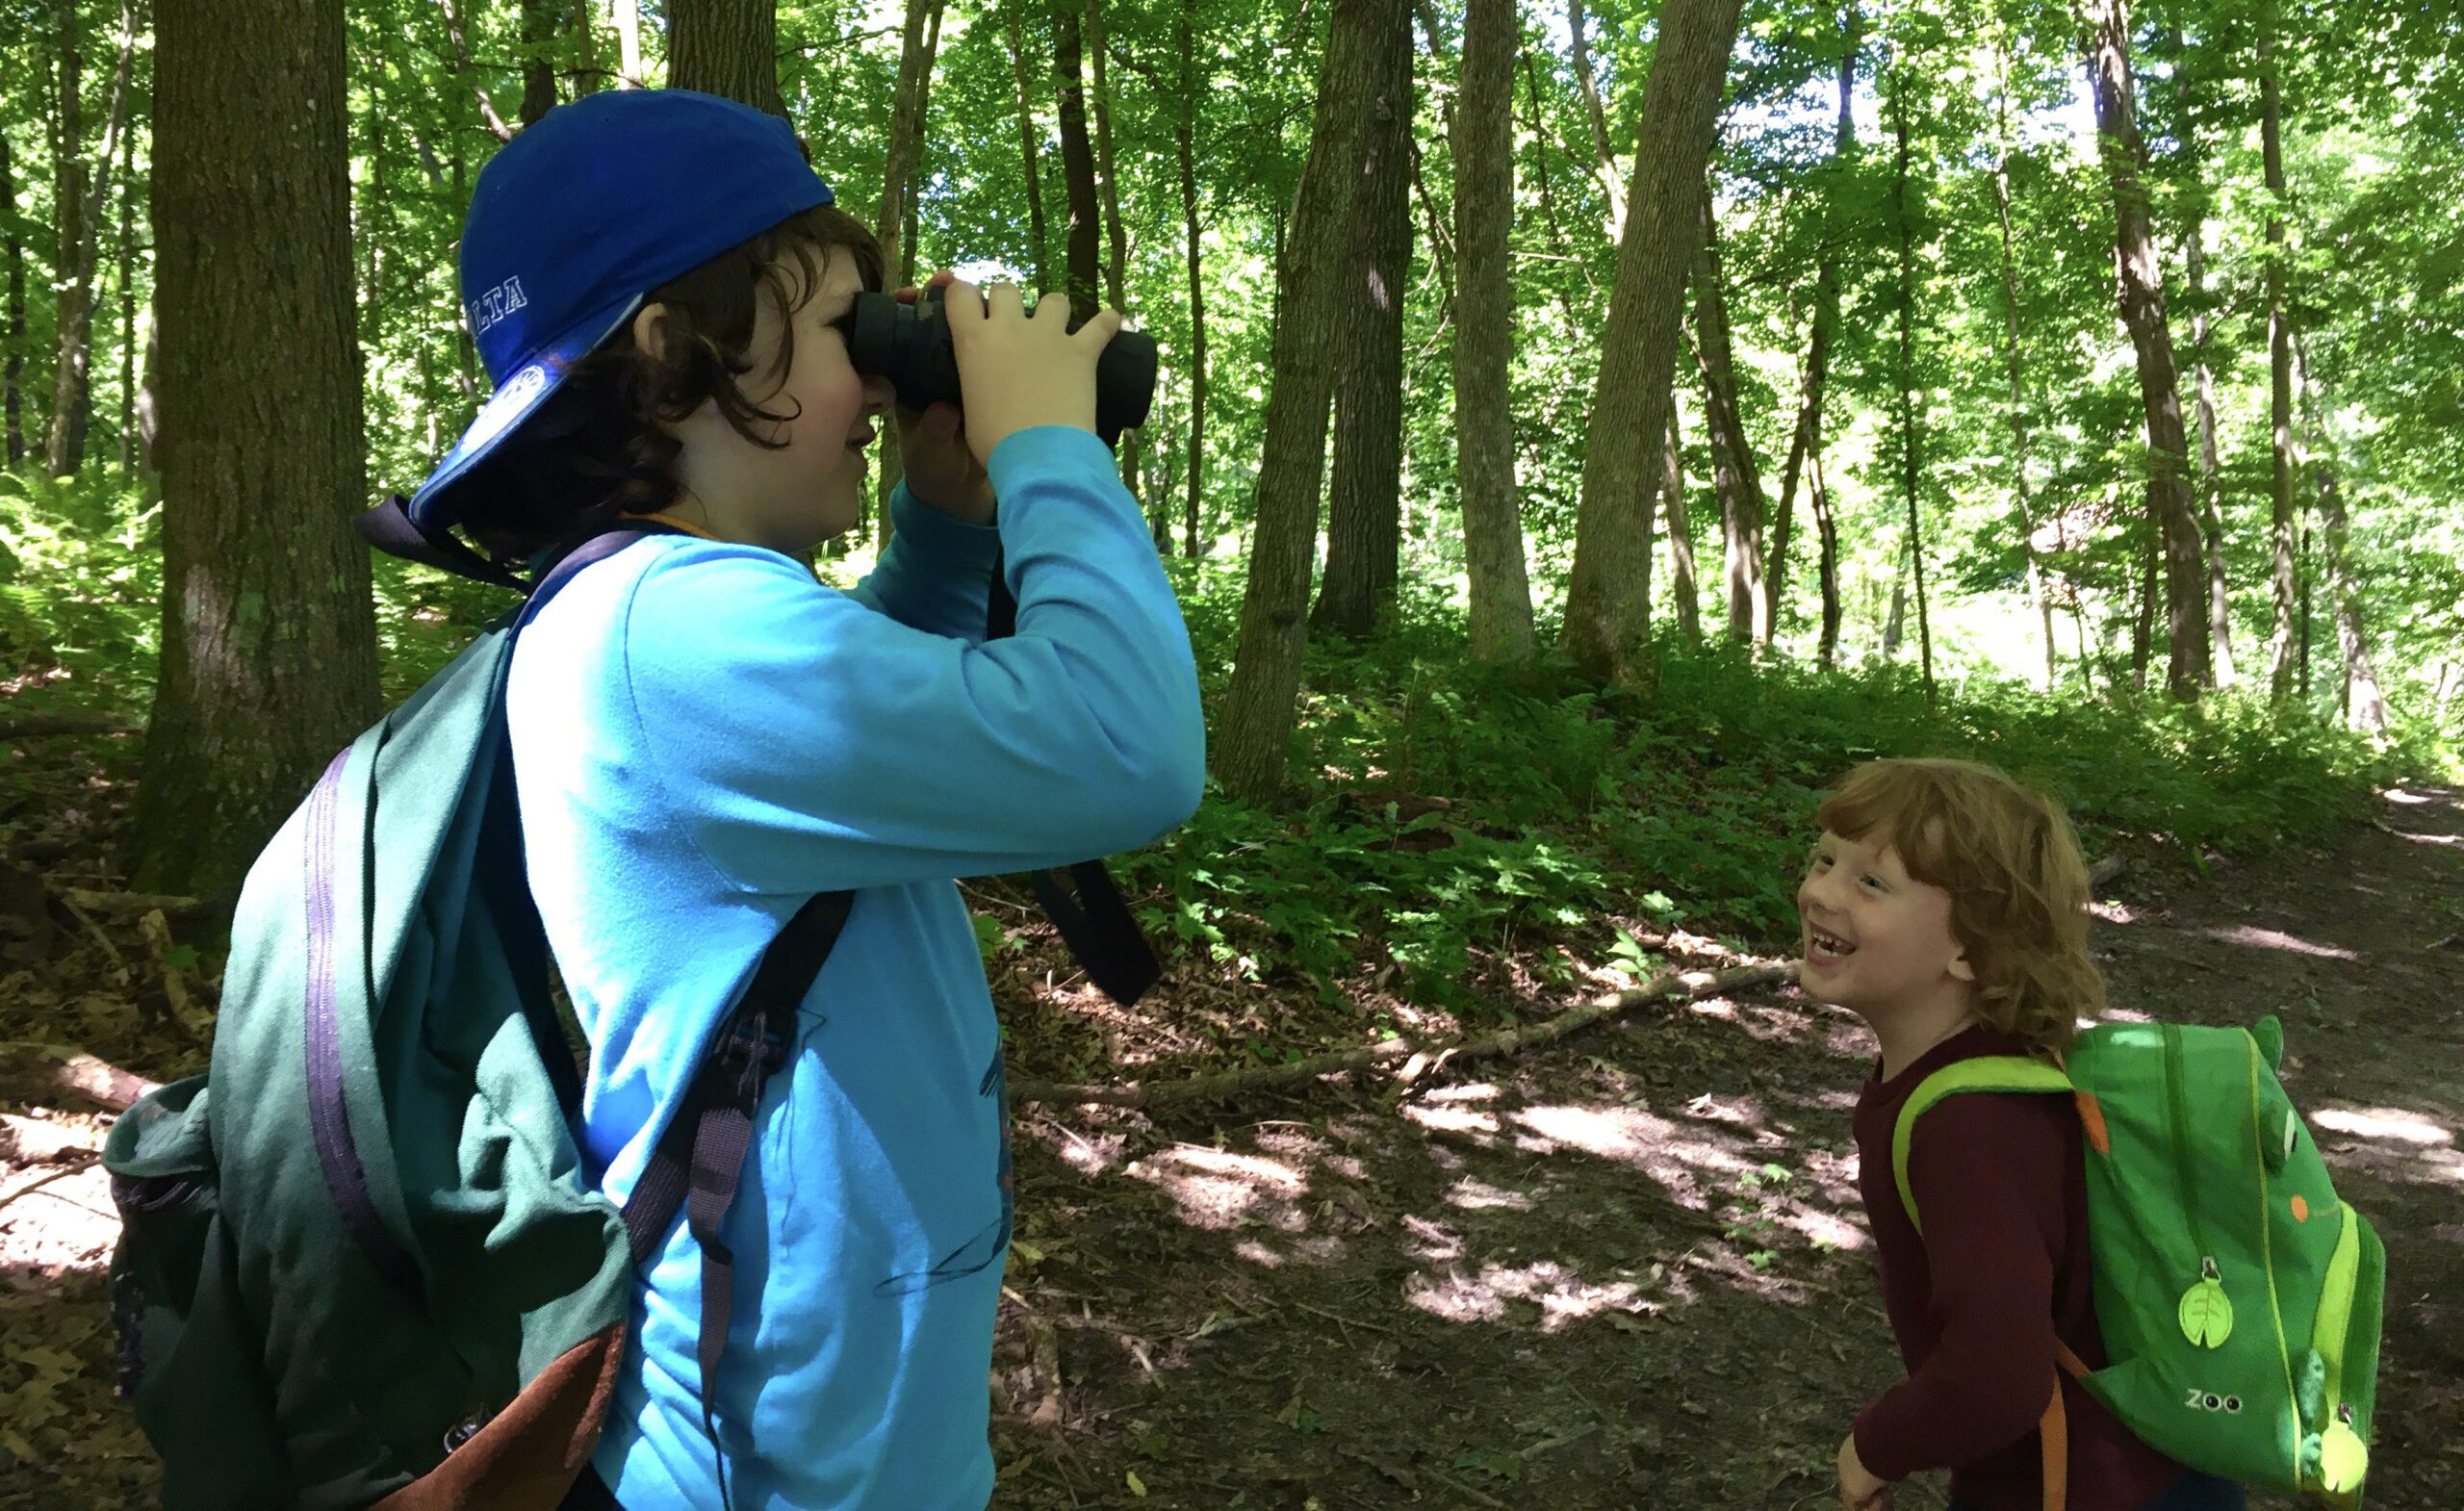 a boy looks on with binoculars while another smiles